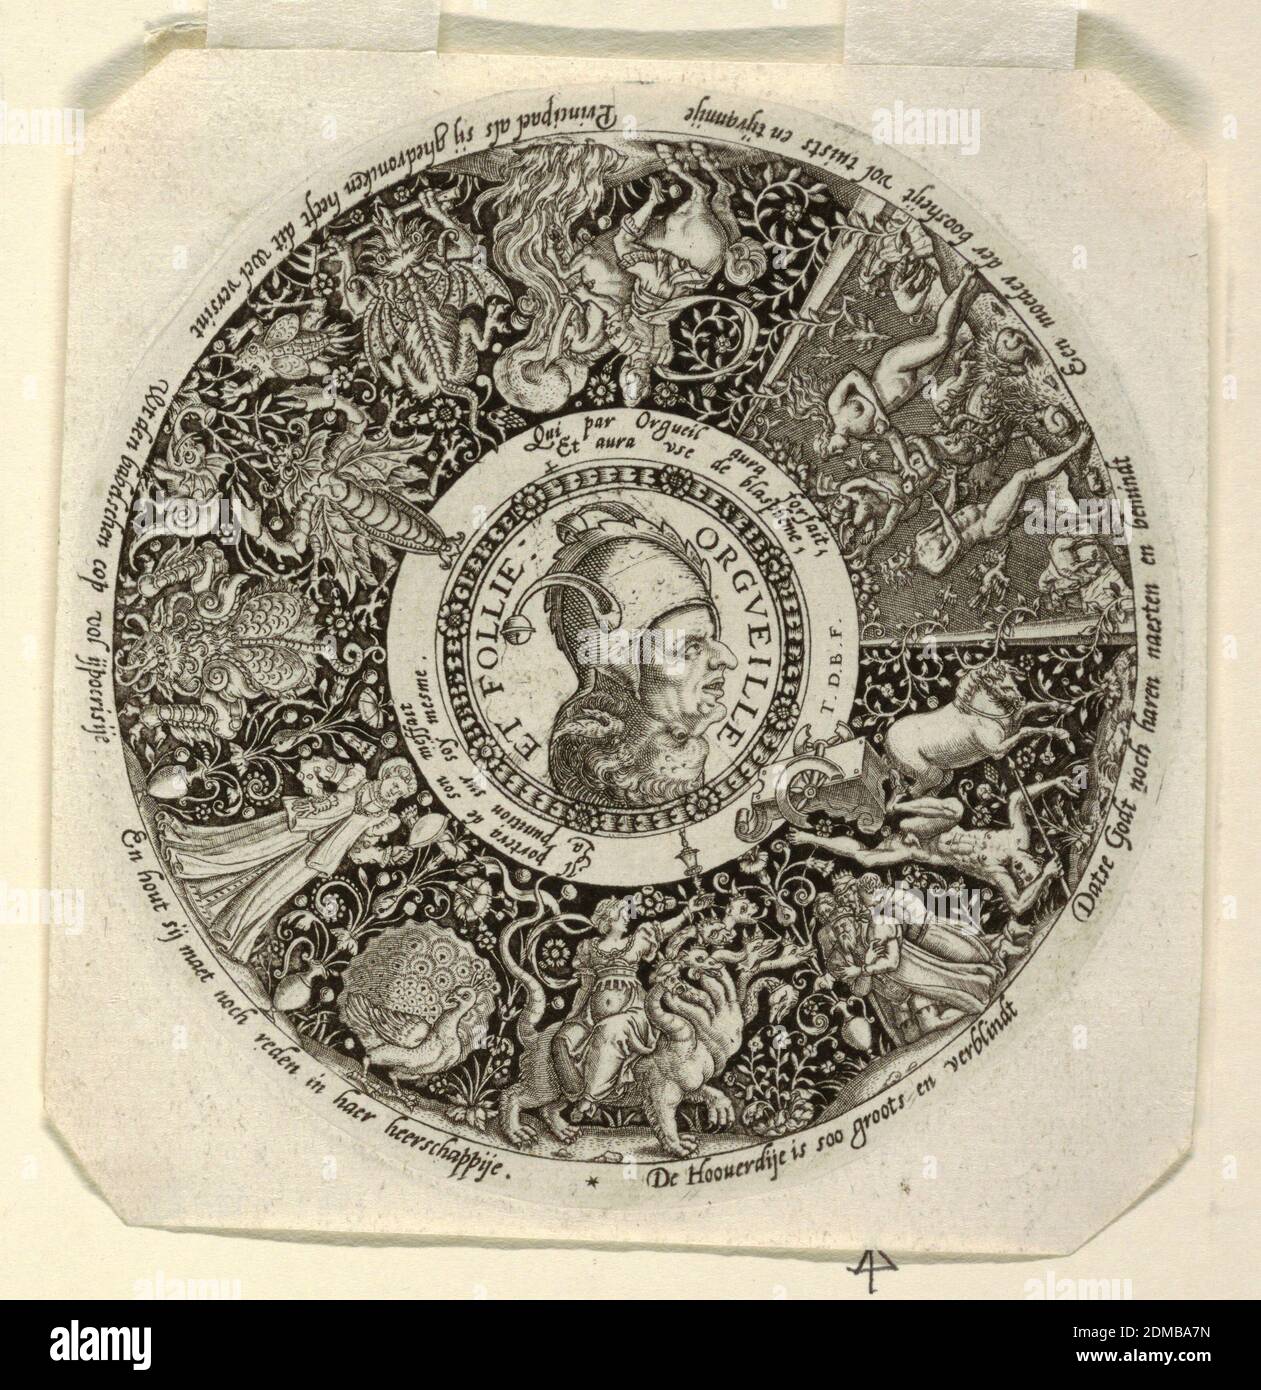 Design for an Engraved Tazza with the Head of a Jester and a Satyr, representing Pride and Folly, Theodor de Bry, Flemish, 1528 – 1598, Engraving on white laid paper, Double head of two men, one of whom wears a fool's cap, in the center, embodying Pride and Foolishness, which form the theme of the representations in the outer circle: the wife upon the dragon of the Revelations of St. John; Phaeton's death; the original sin; Marcus Curtius jumping into the abyss; a woman with a looking glass; a peacock; monsters. Inscriptions in Low German and French., Netherlands or Belgium, ca. 1588, ornament Stock Photo